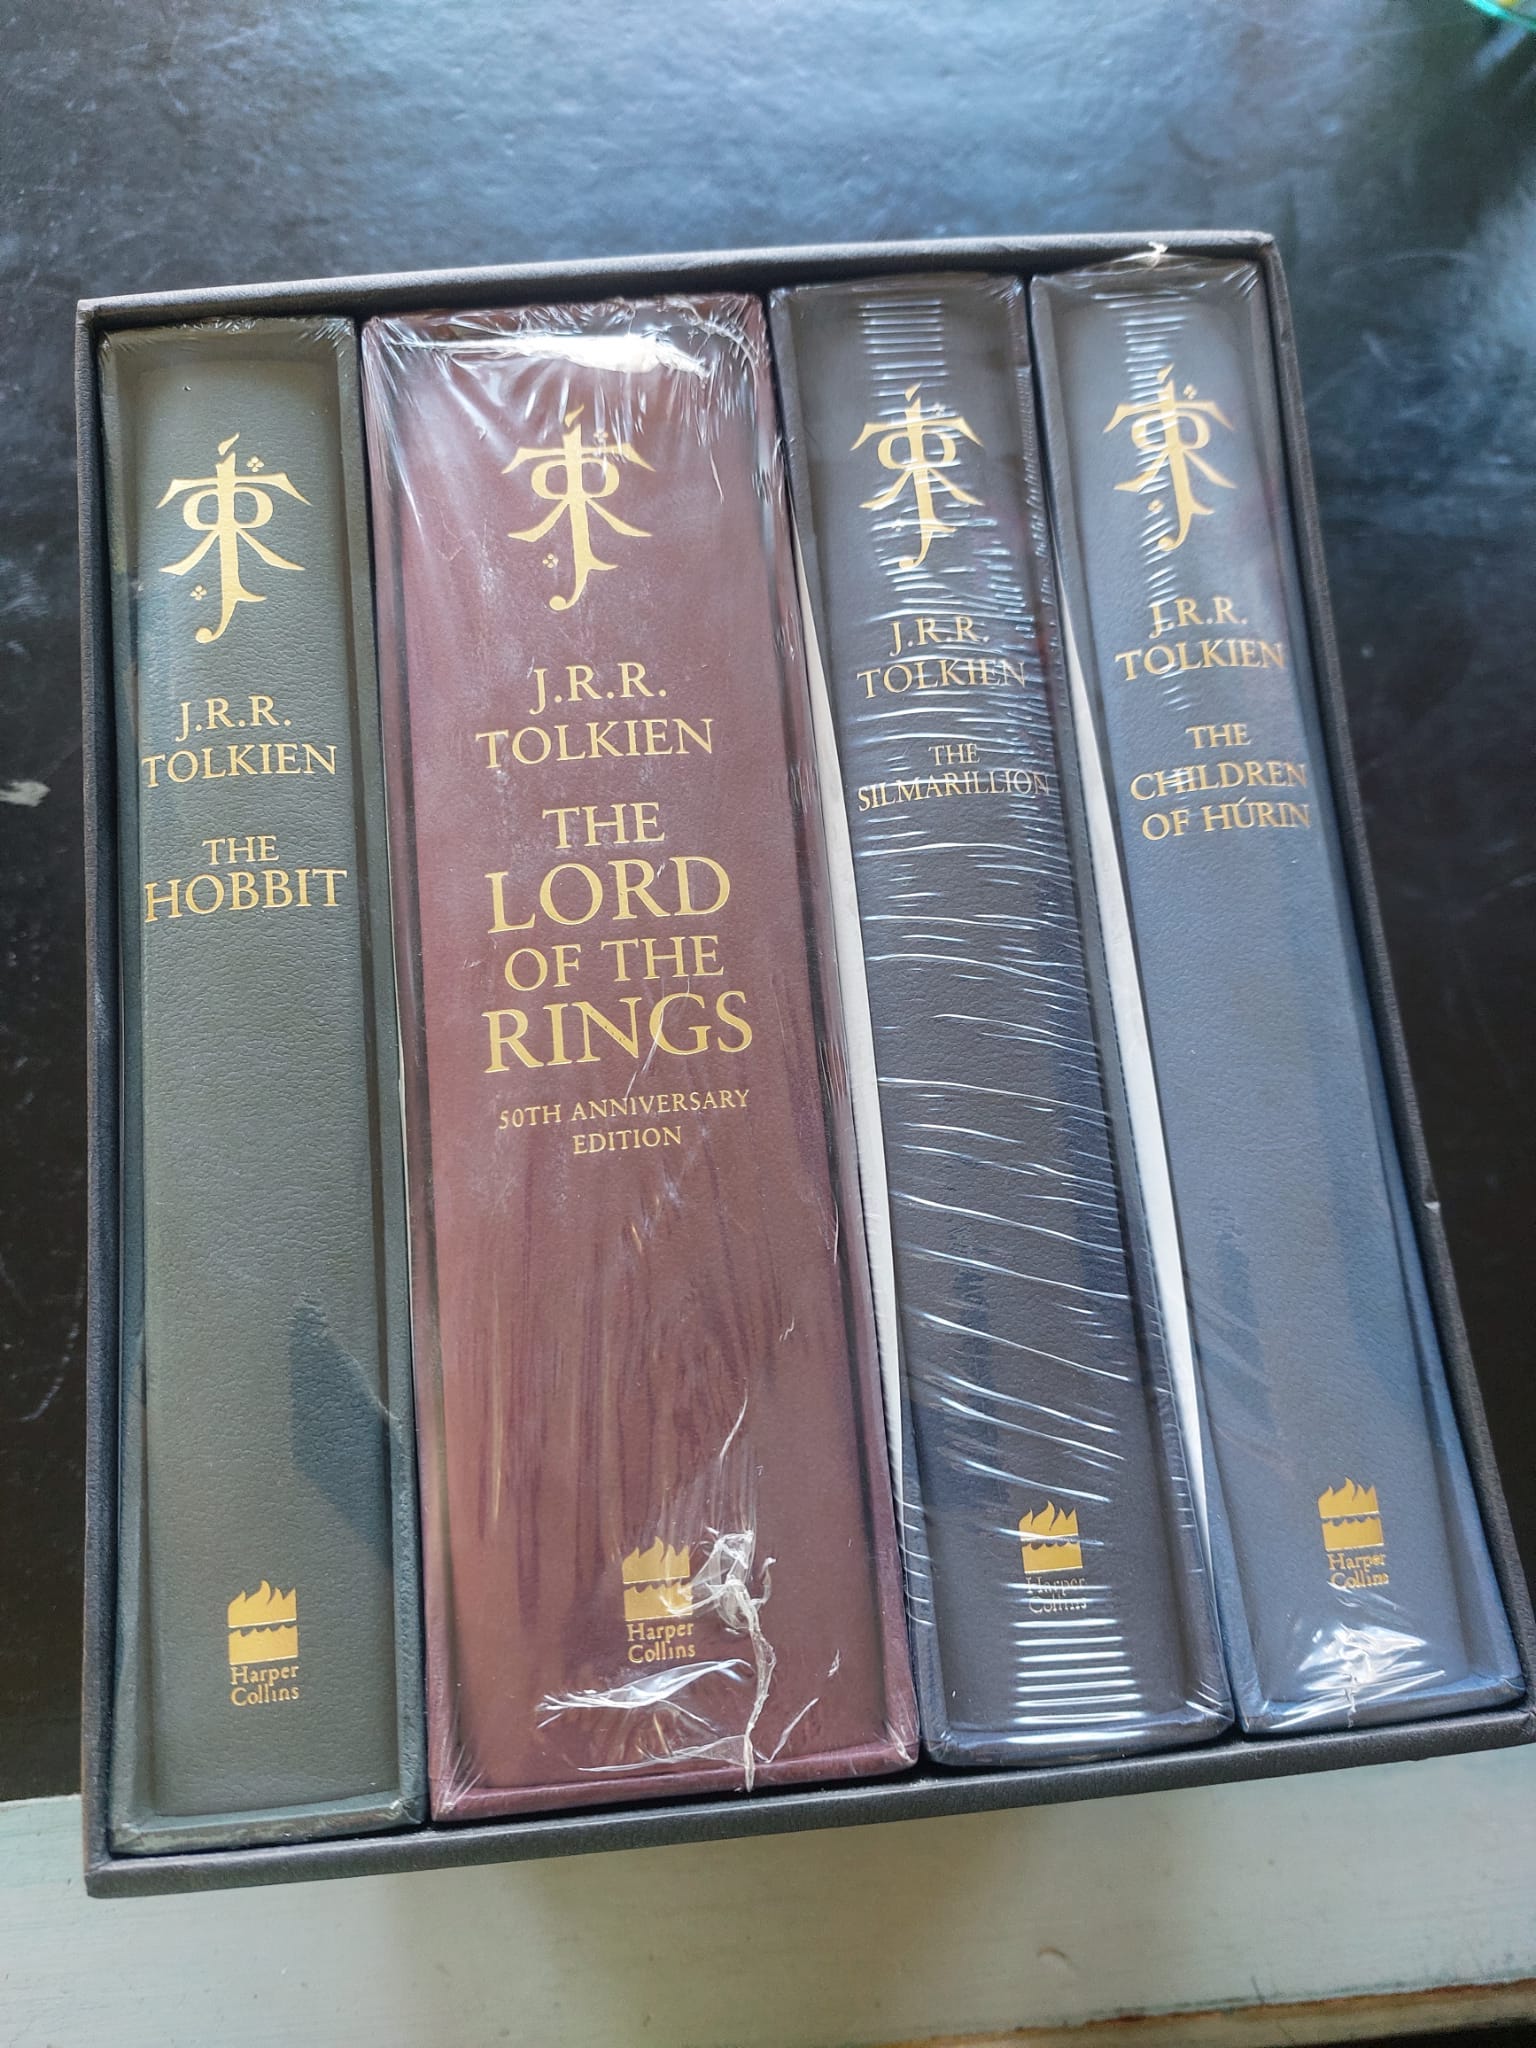 The J.R.R. Tolkien Deluxe Edition Collection in Original Publishers Slipcase, Limited to 500 Sets